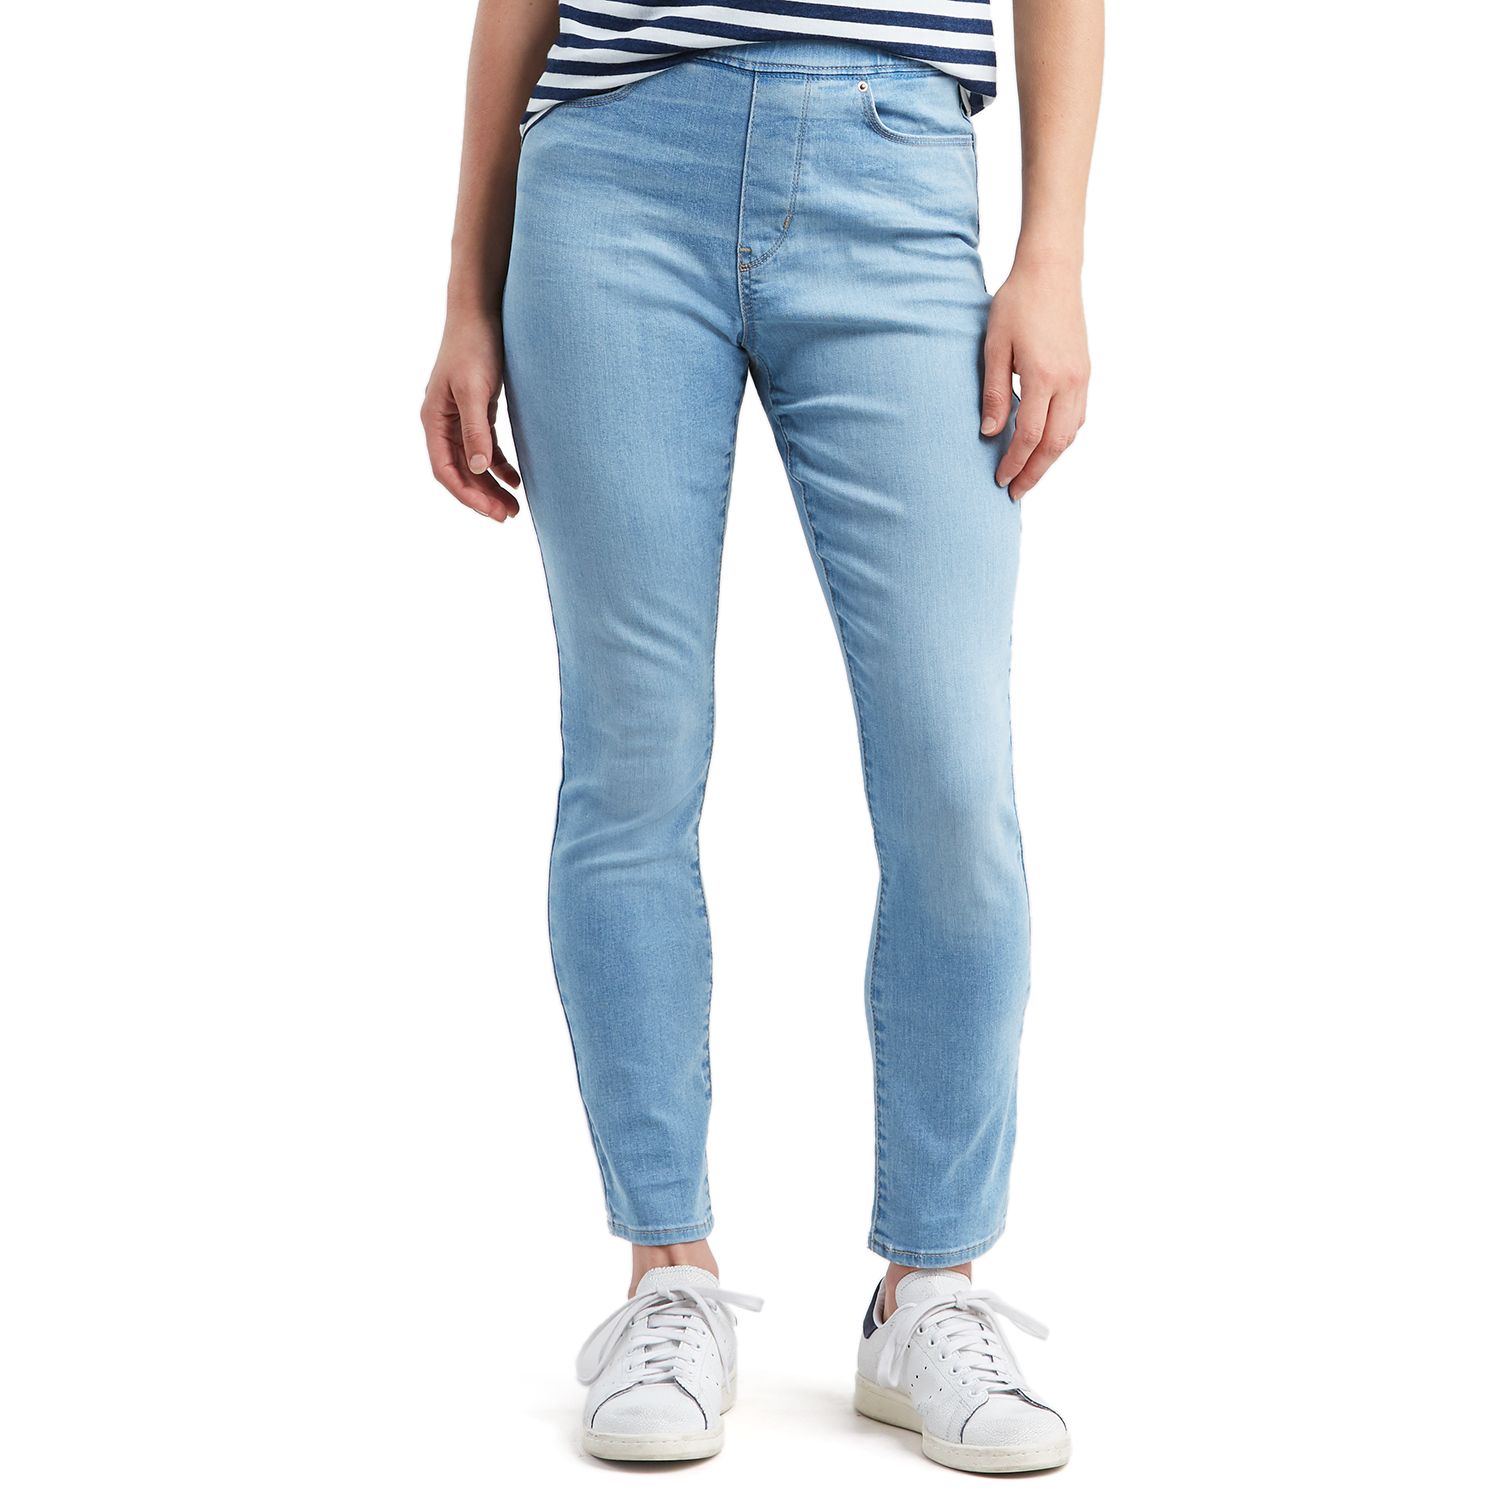 levis pull on jeans